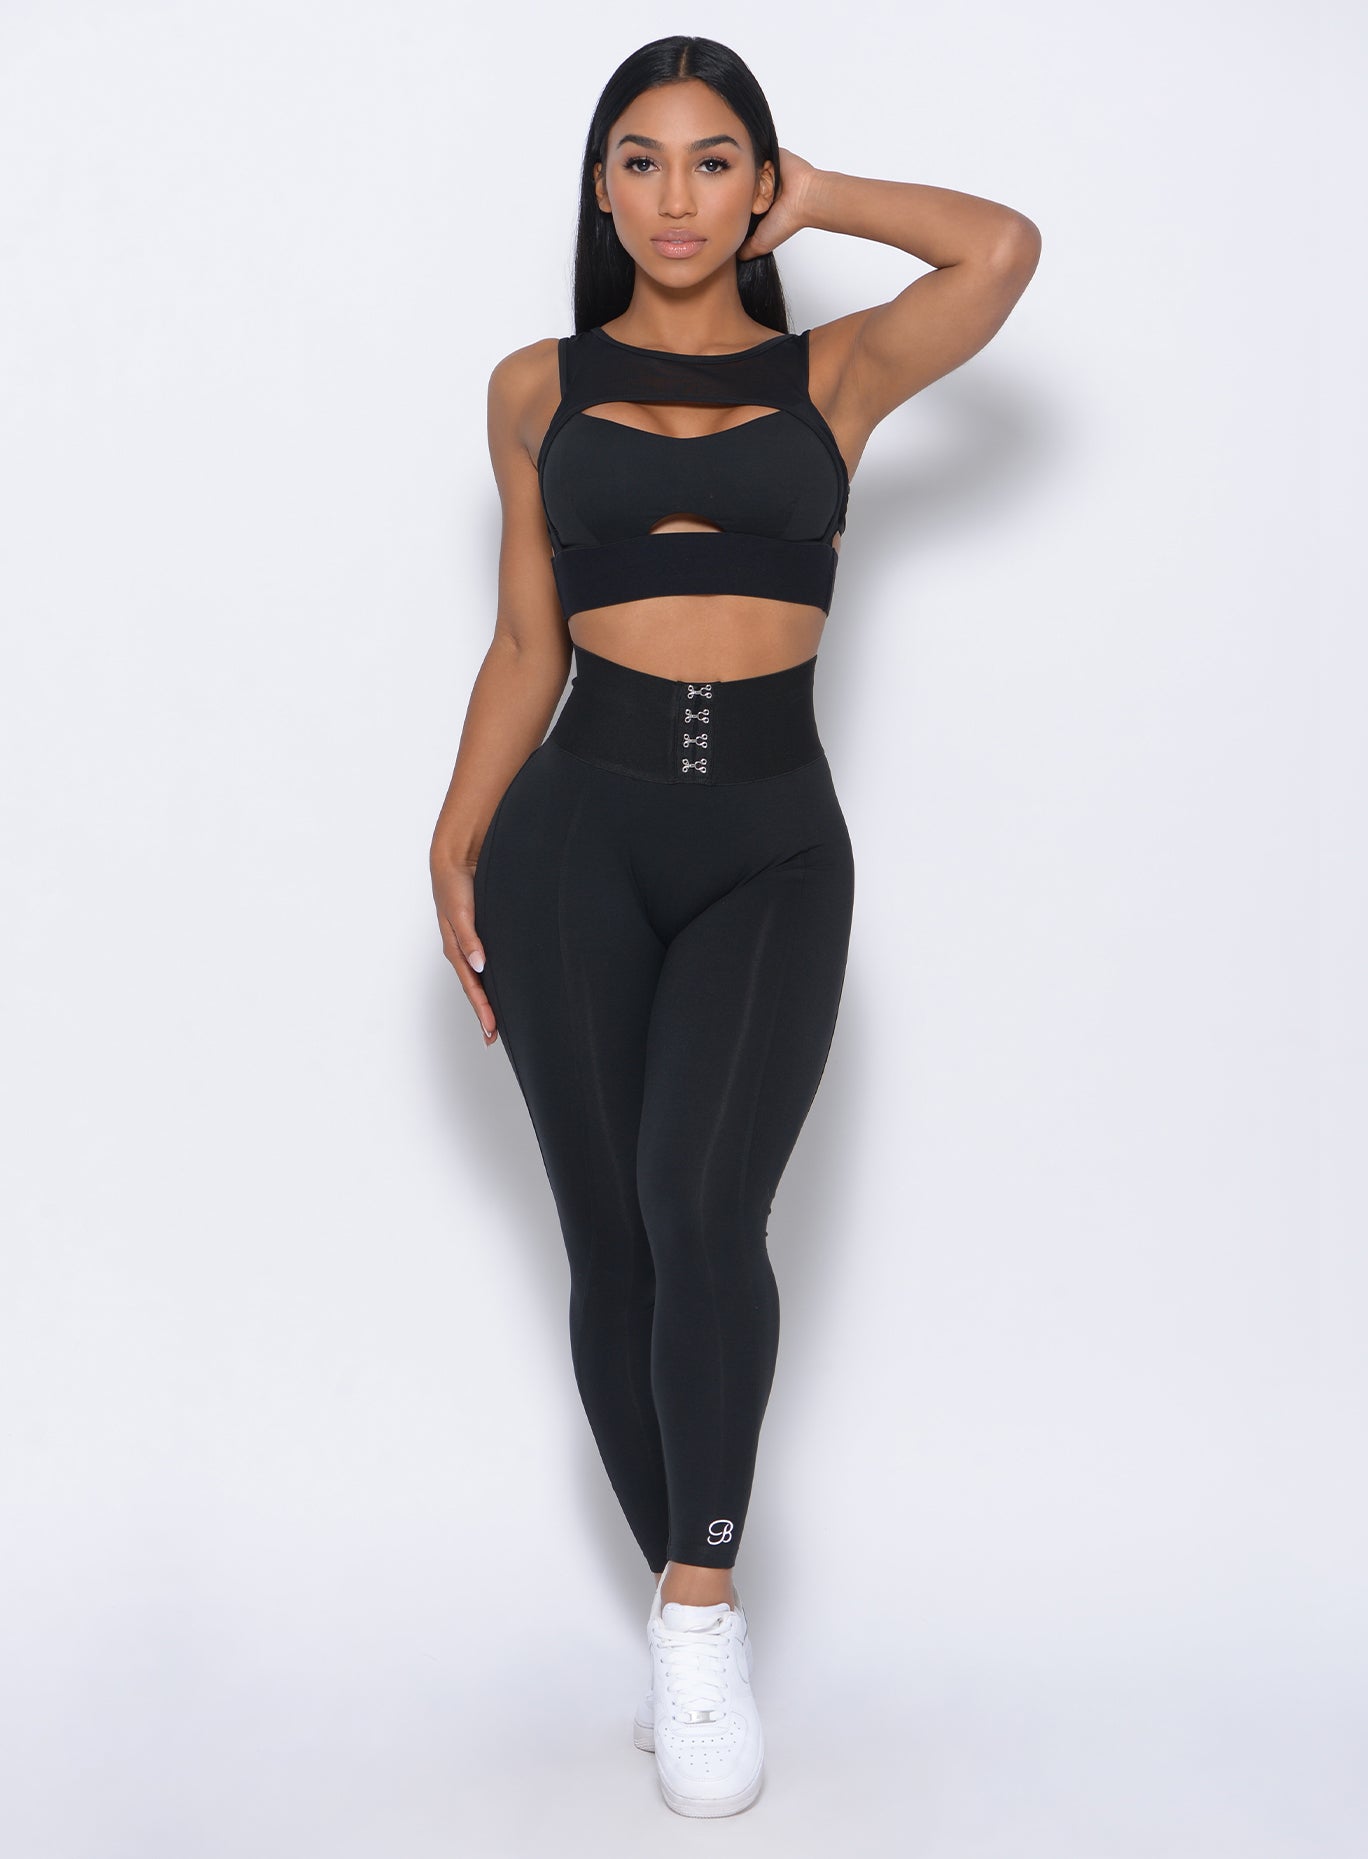 Model facing forward in our black waist cincher leggings and a matching bra